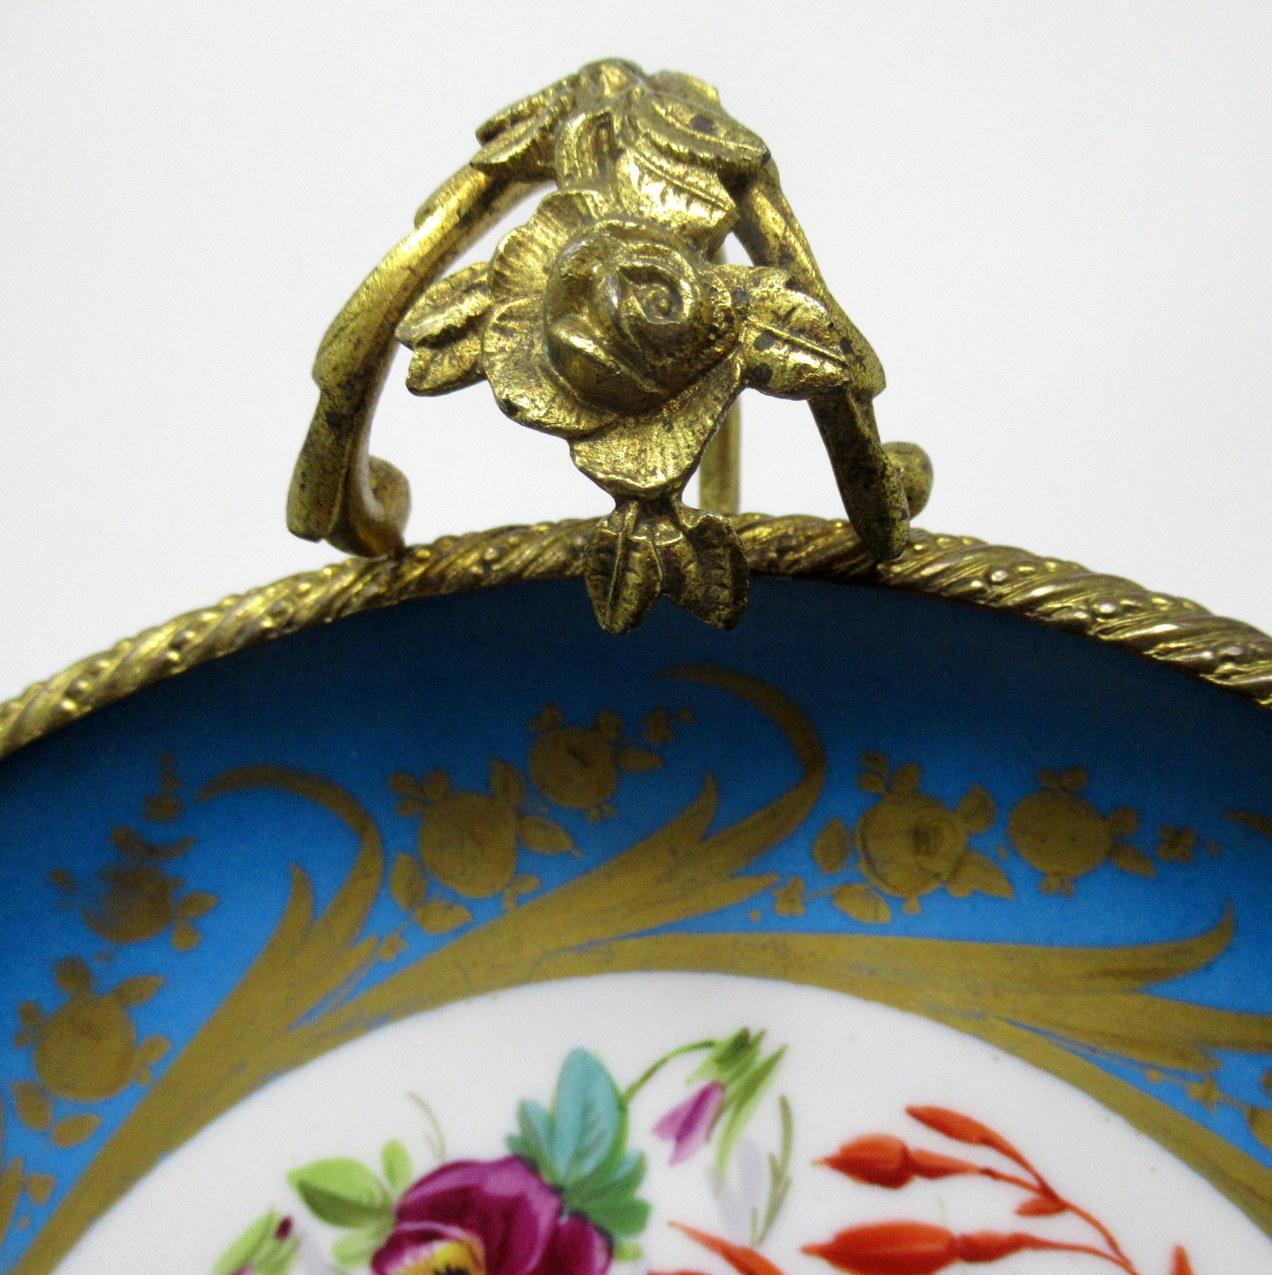 Antique French Sevres Ormolu Gilt Bronze Dore Porcelain Tazza Cabinet Plate Dish For Sale 3